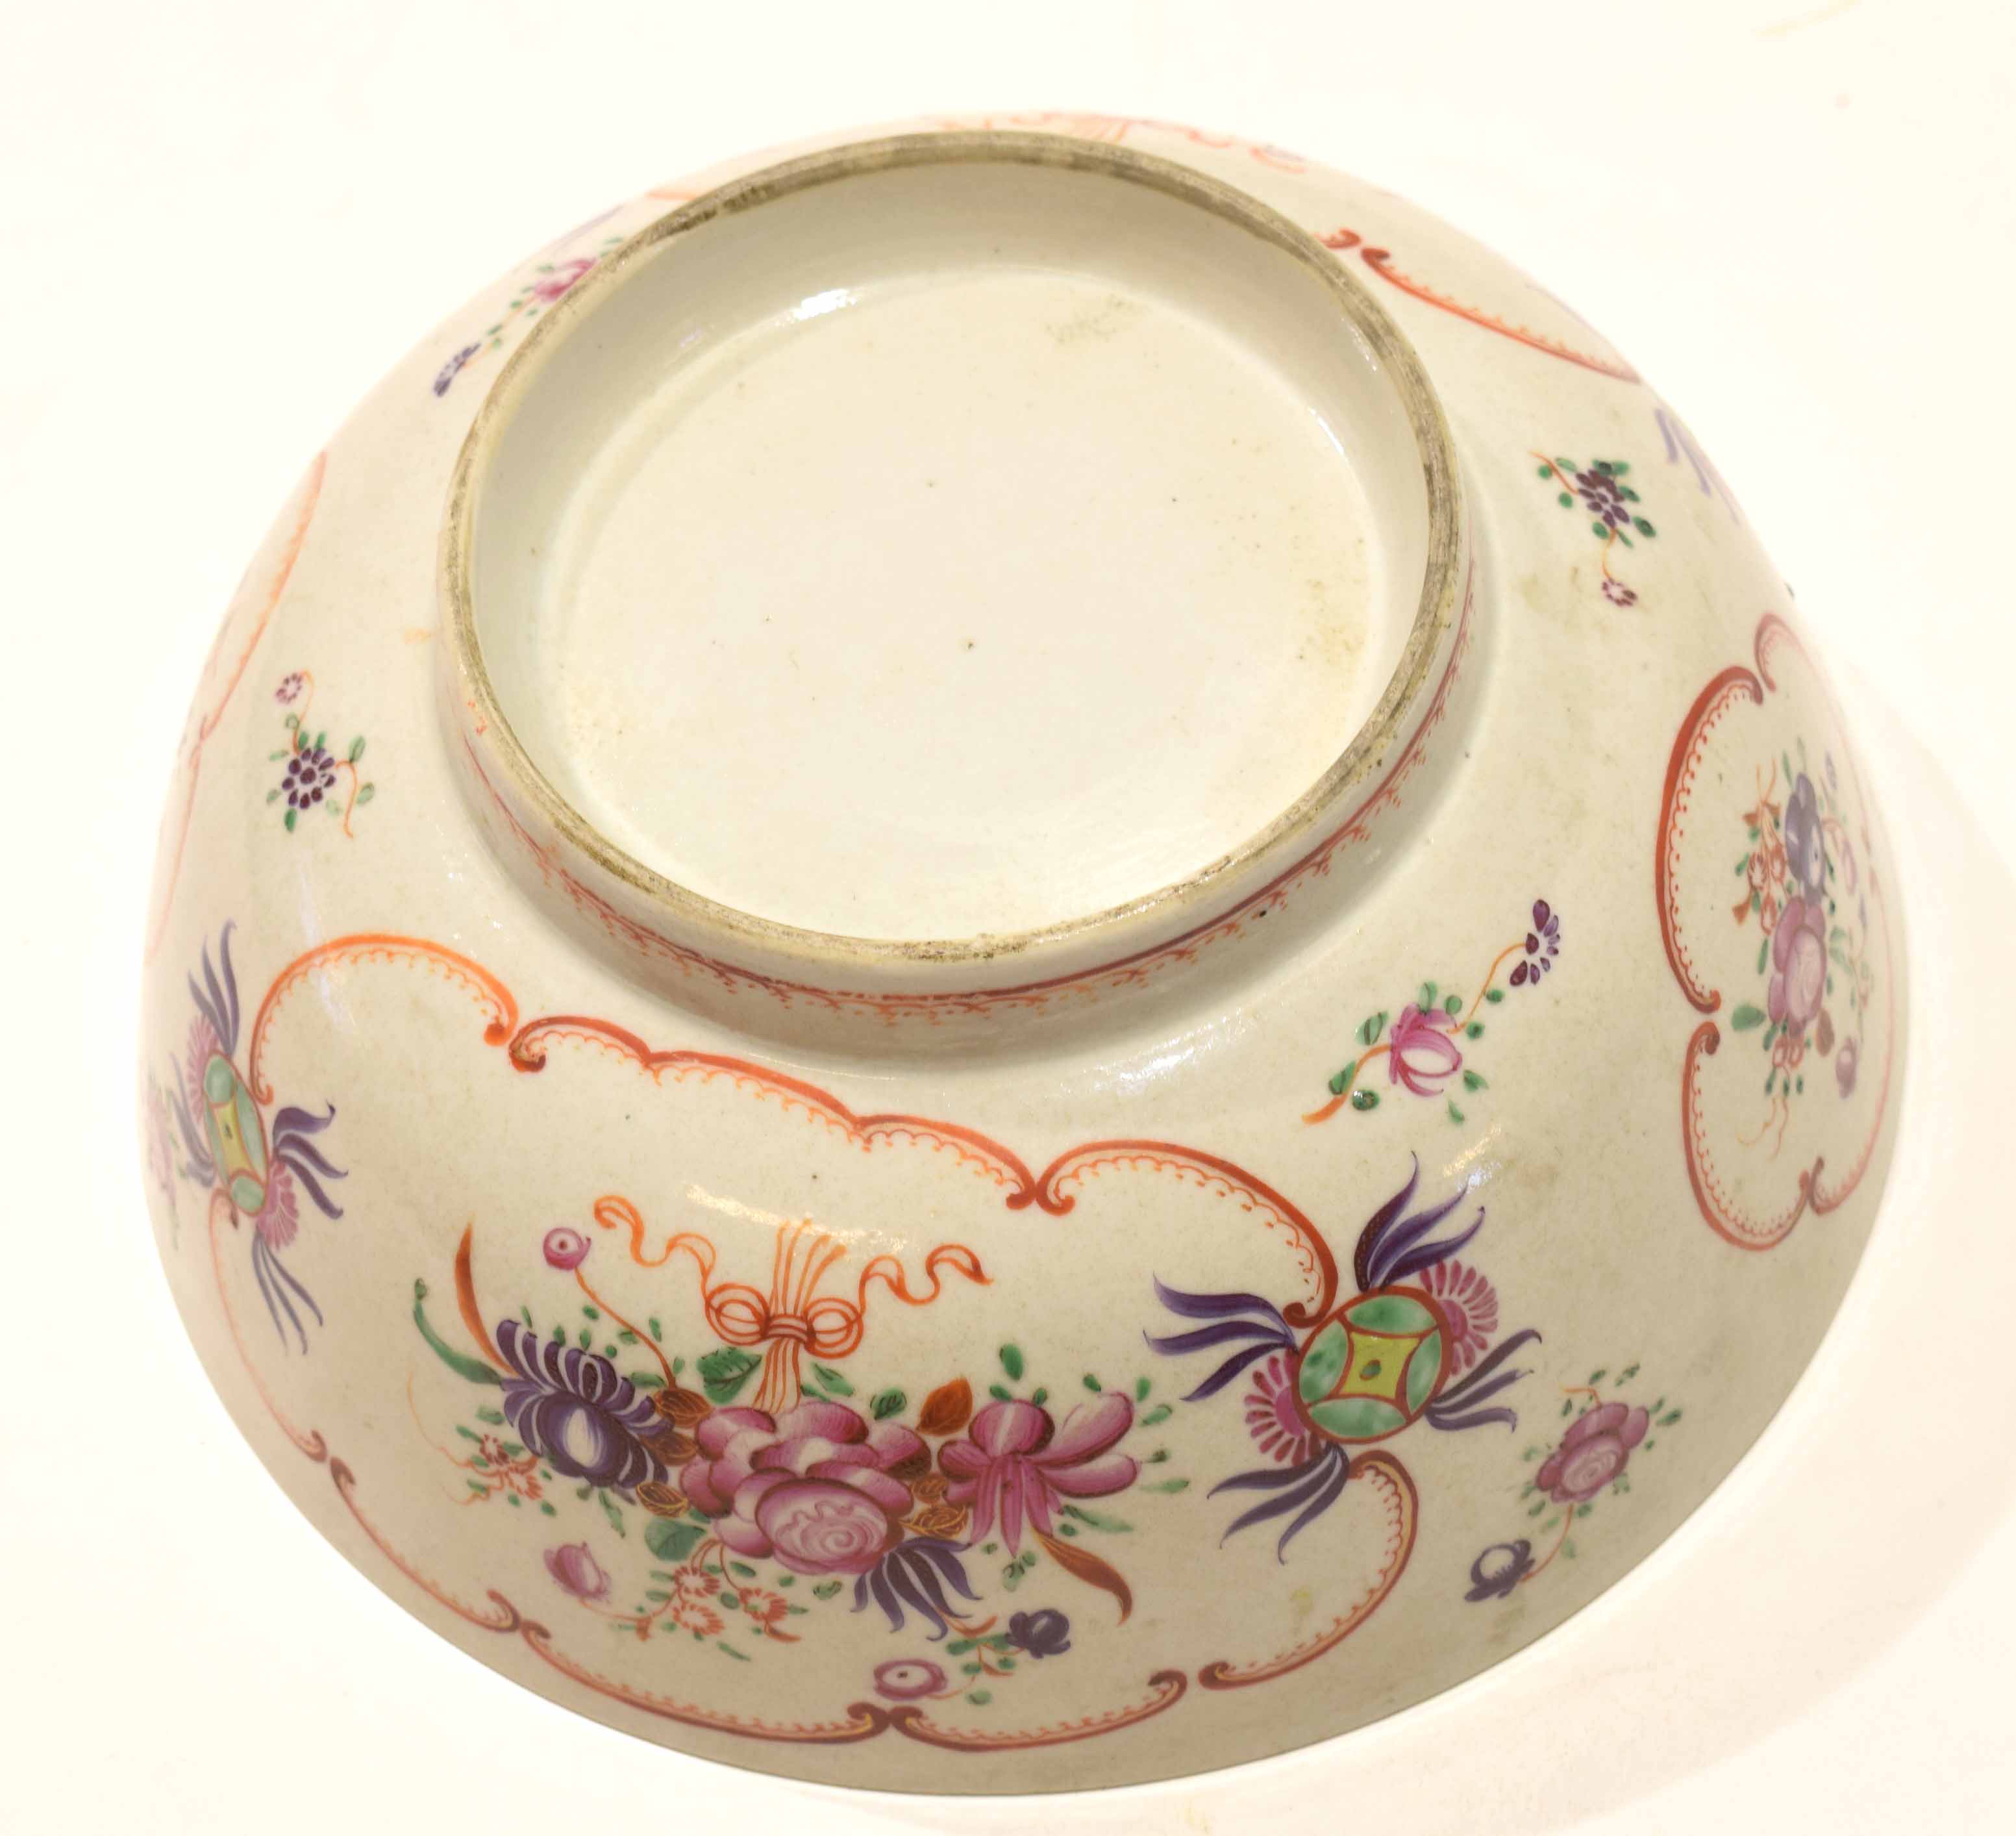 Late 18th century Chinese porcelain punch bowl, decorated in polychrome flowers to the exterior - Image 3 of 3